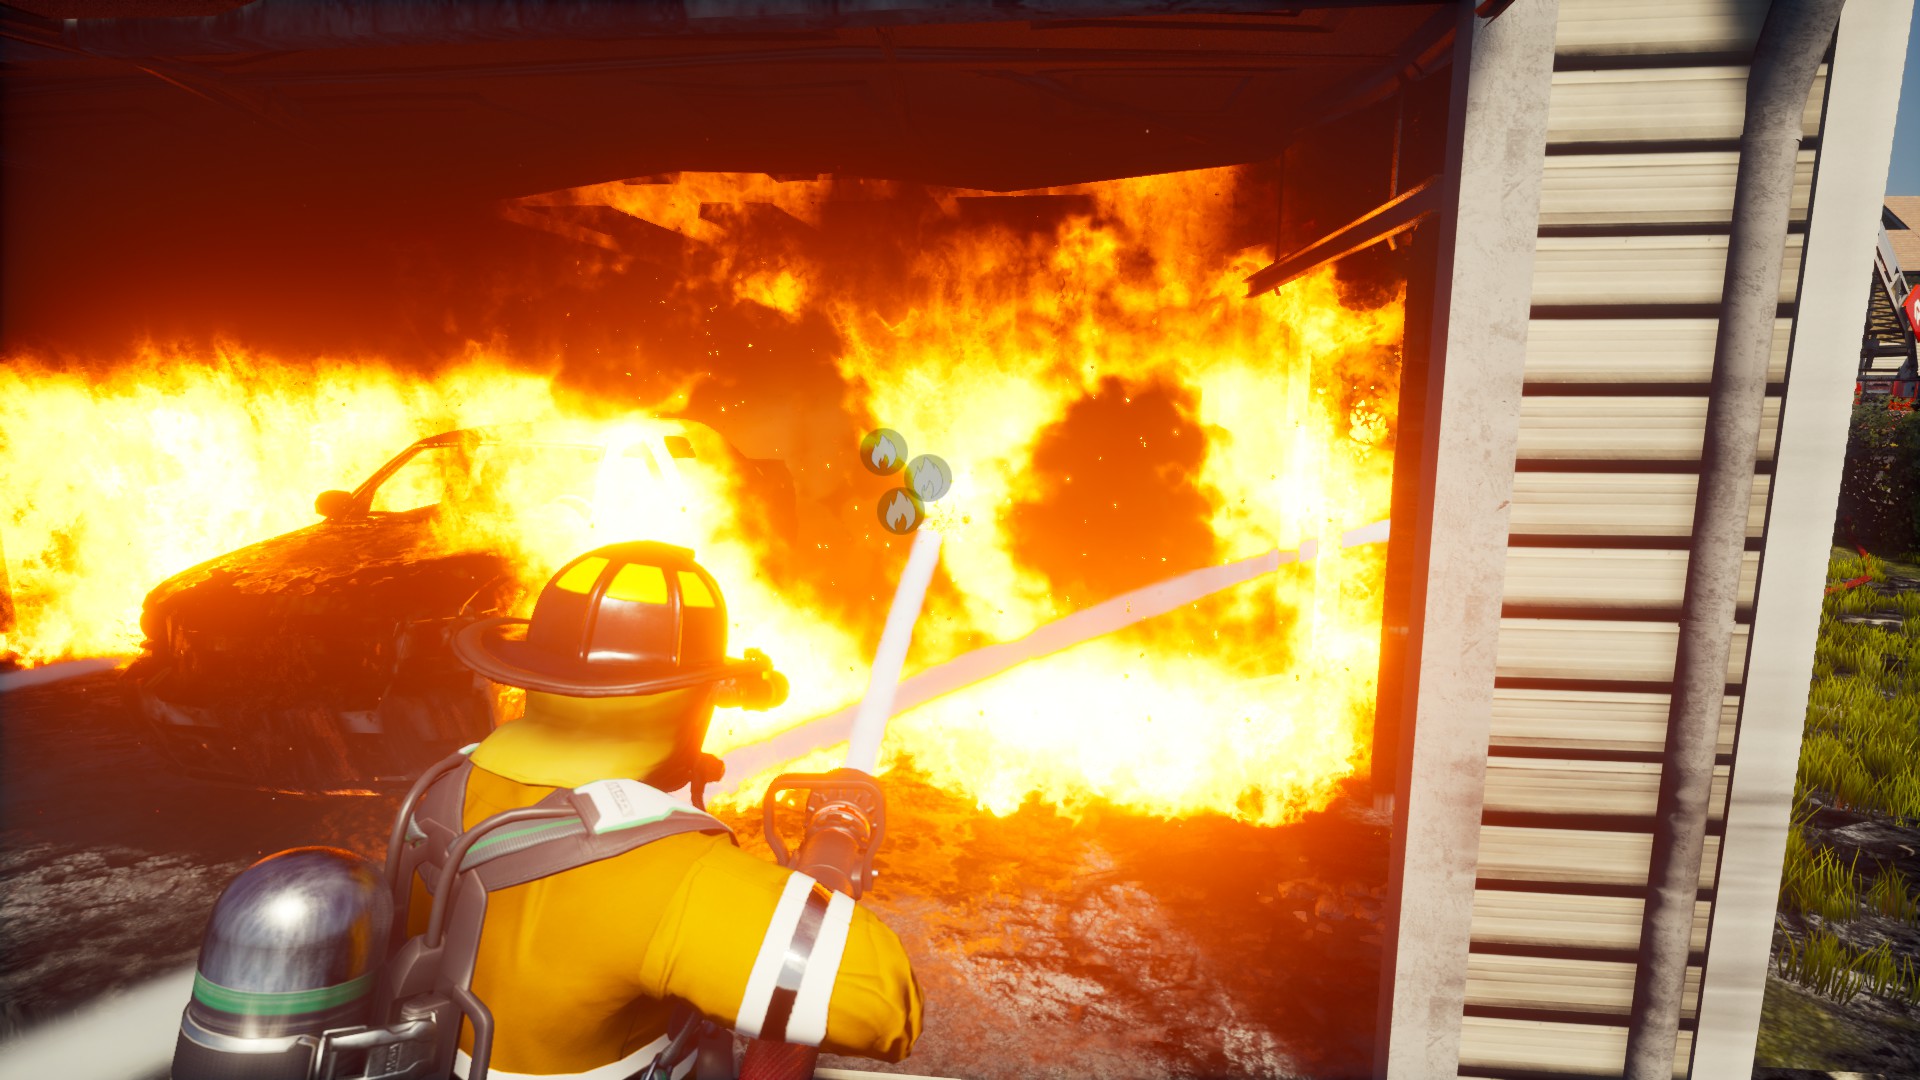 The shame review Simulator fire the Through Firefighting the and -- - Squad